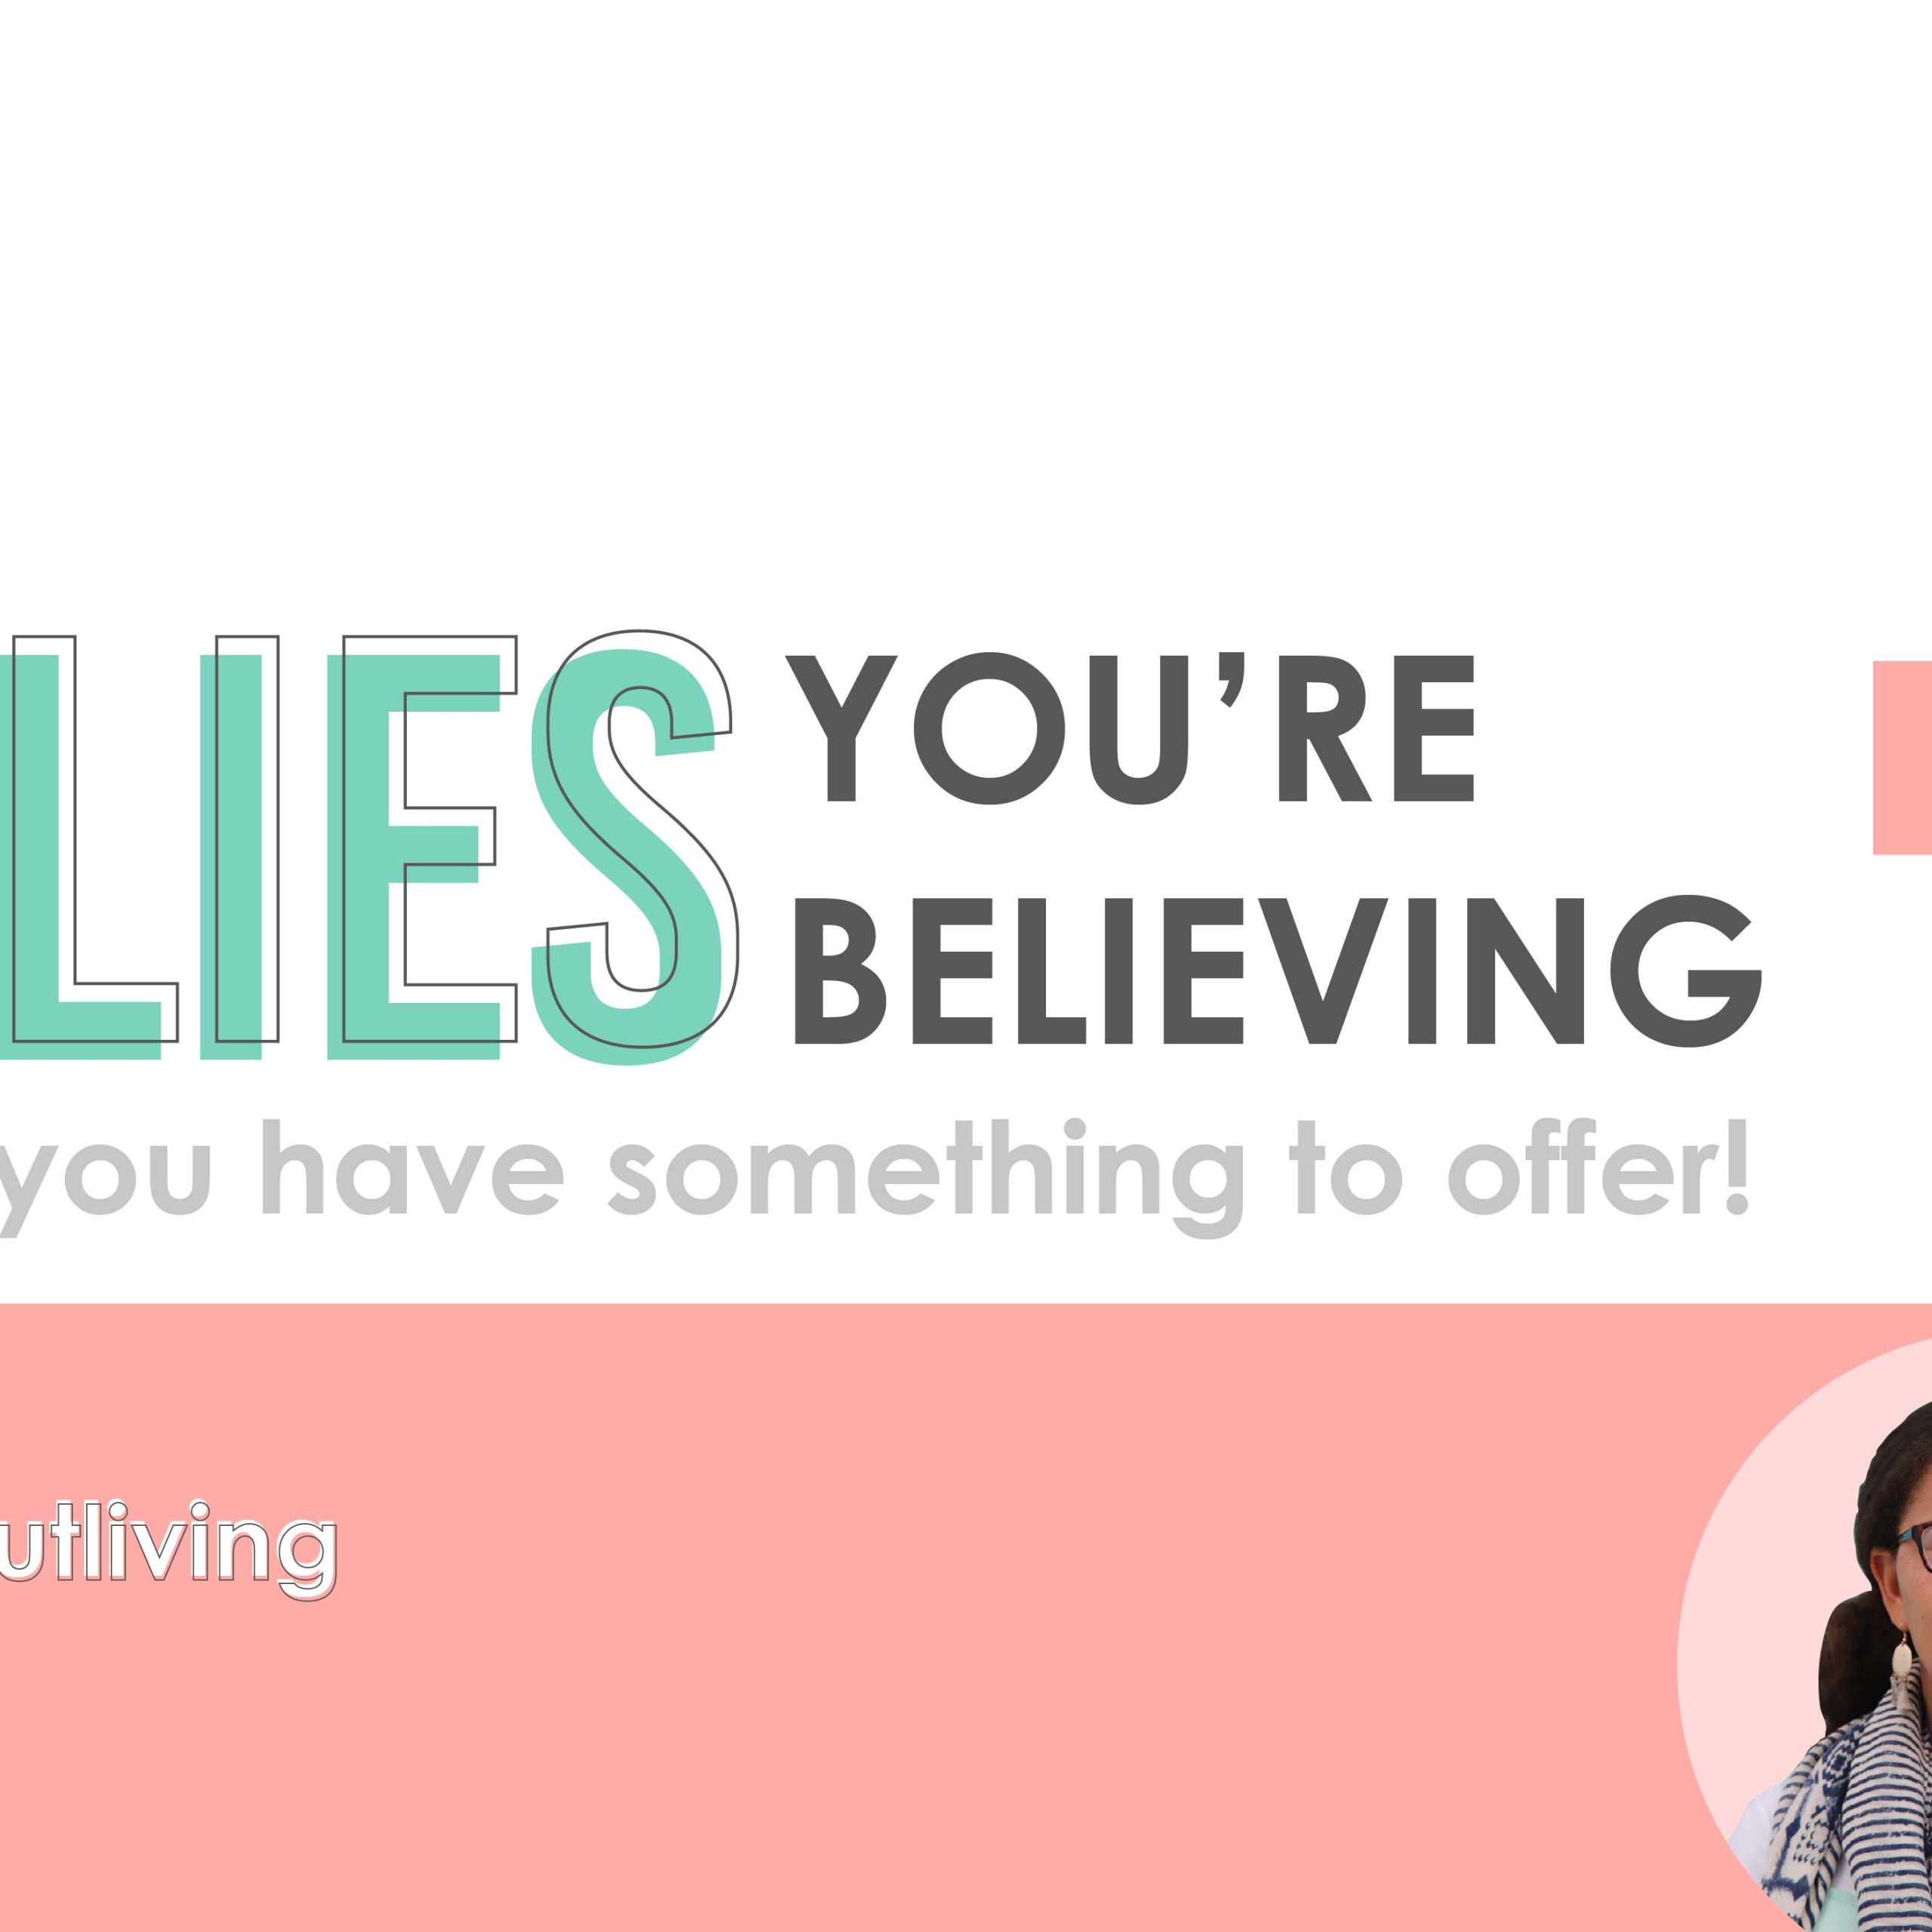 Episode 4 Lies you're believing and the truth you have something to offer called out living female entrepreneur-04 mindset goals